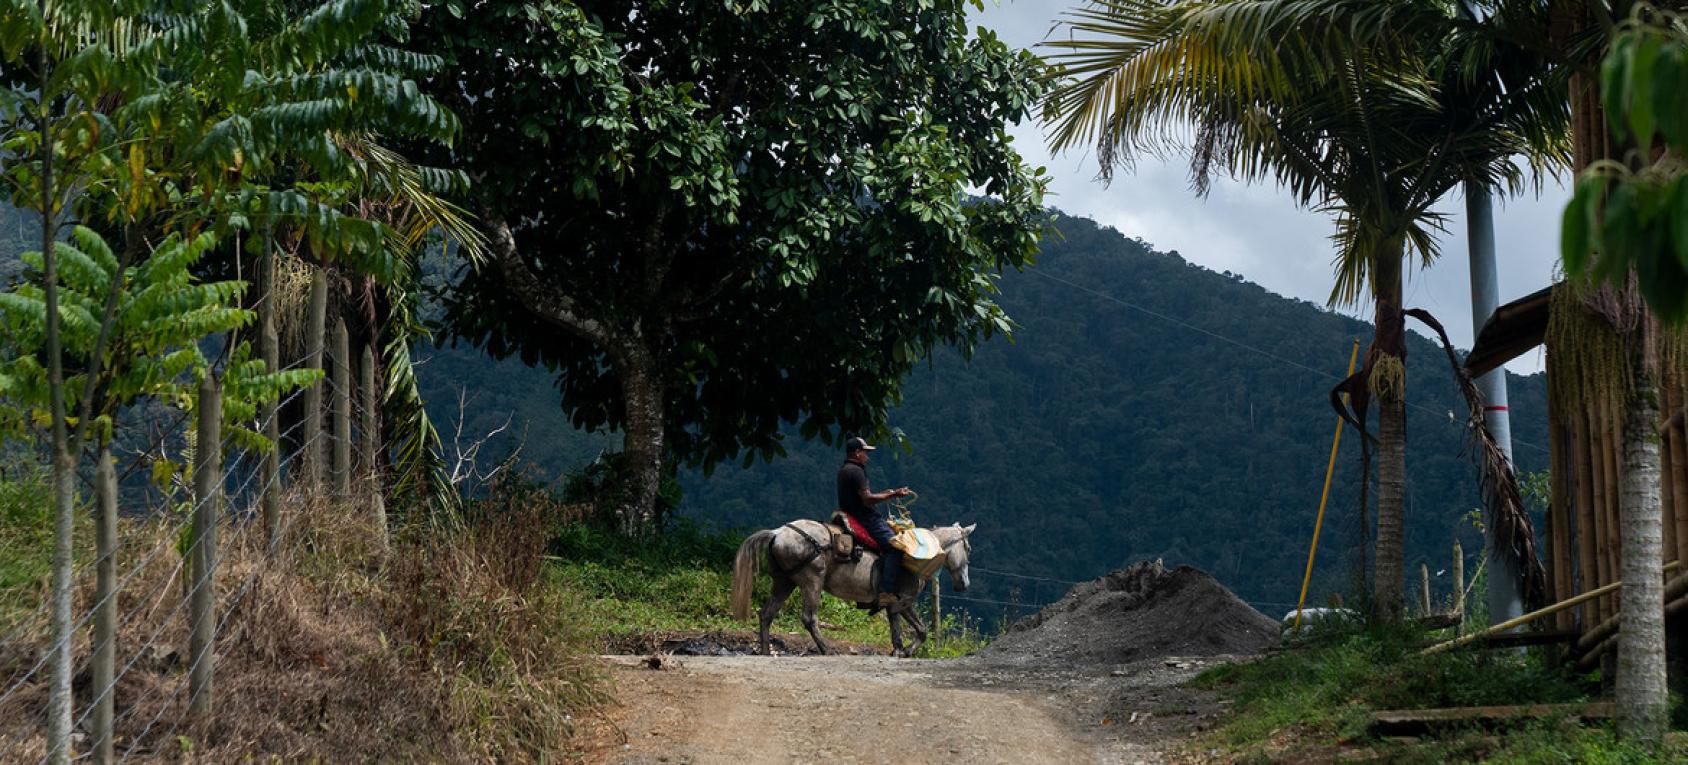 A man is seen at the end of a dirt road sitting on a horse outside near lush green land.